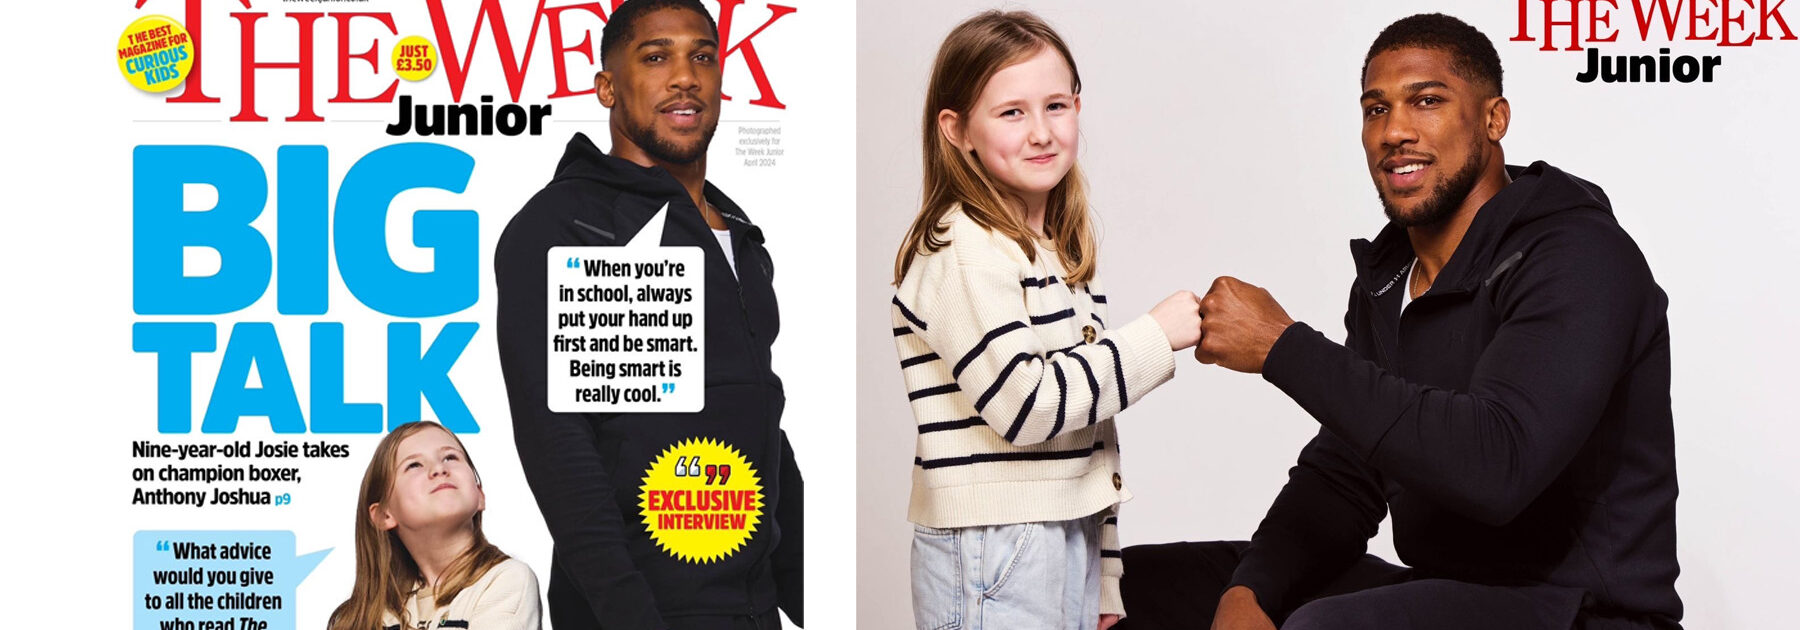 Josie Sizes Up to Anthony Joshua for The Week Junior